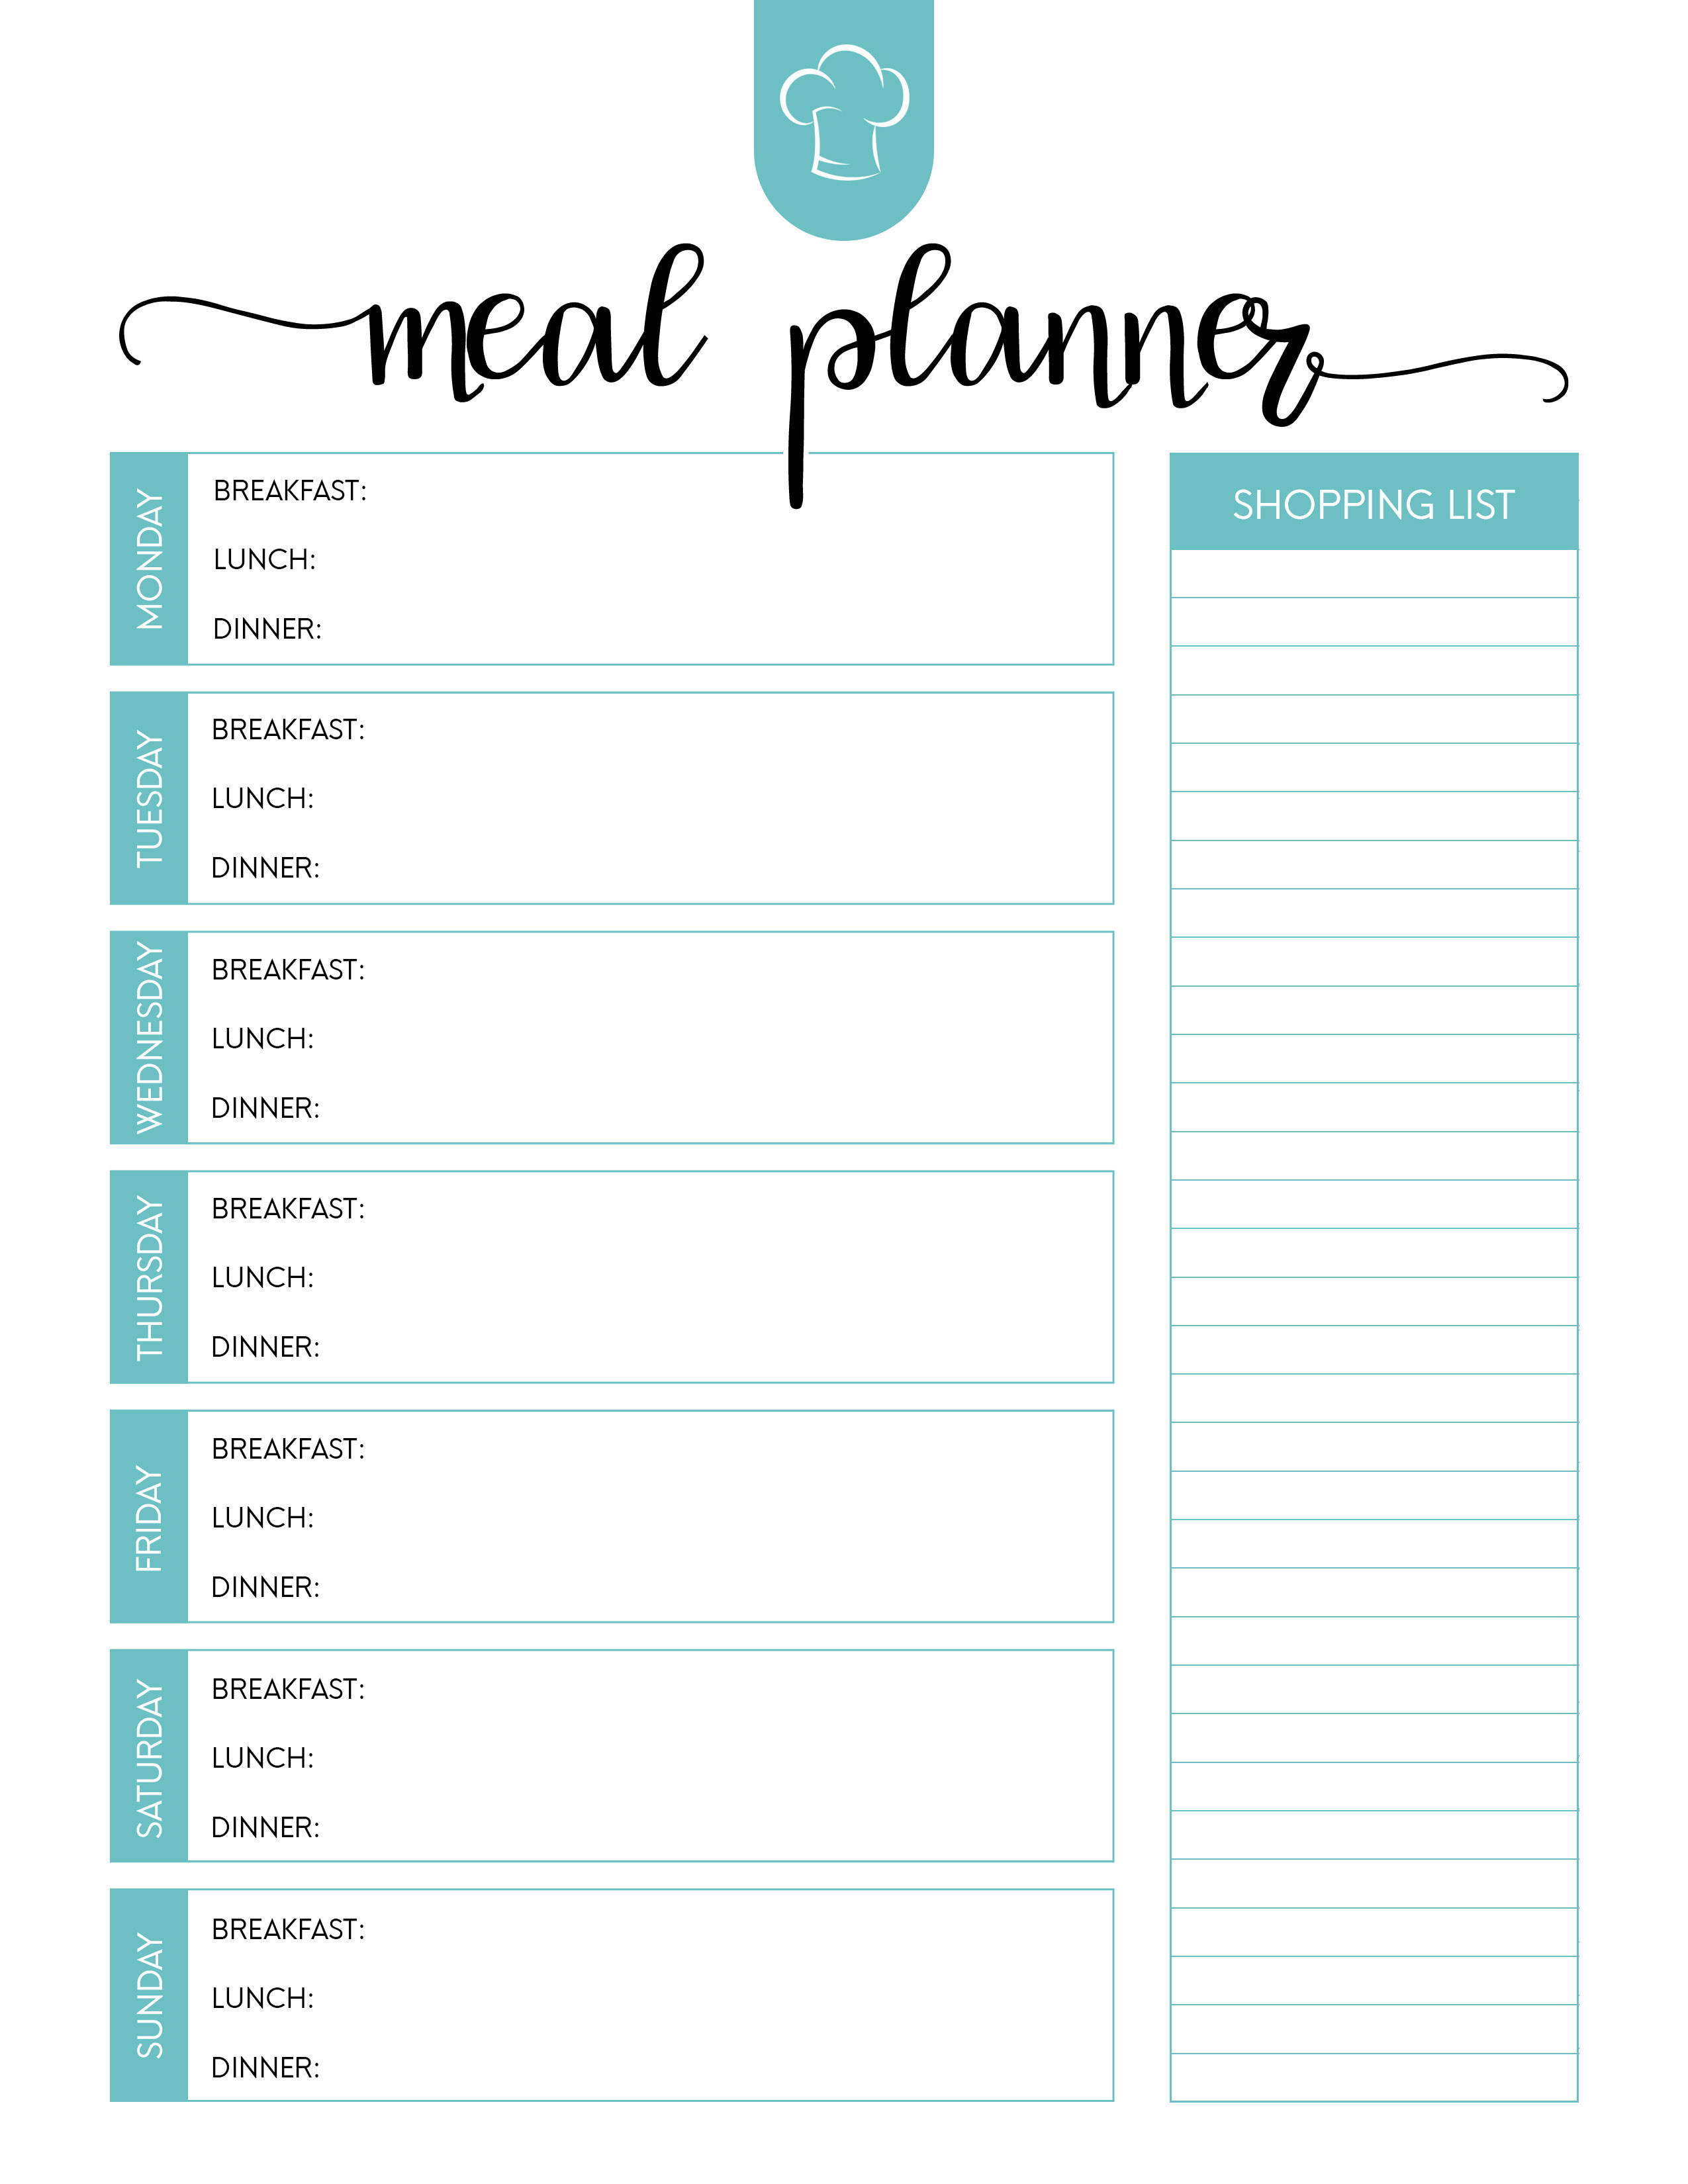 Free Printable Meal Planner Set - The Cottage Market - Free Printable Meal Planner